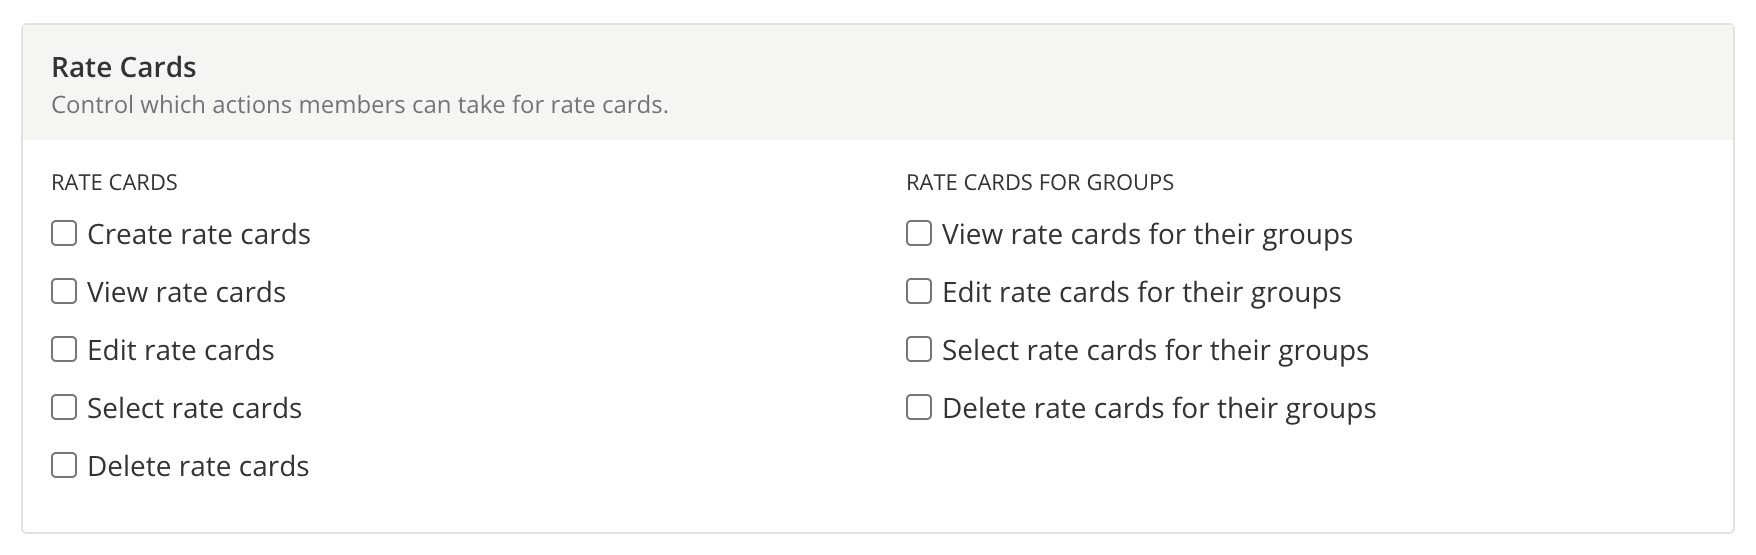 Rate Card Permissions in Account Settings Access Groups.png